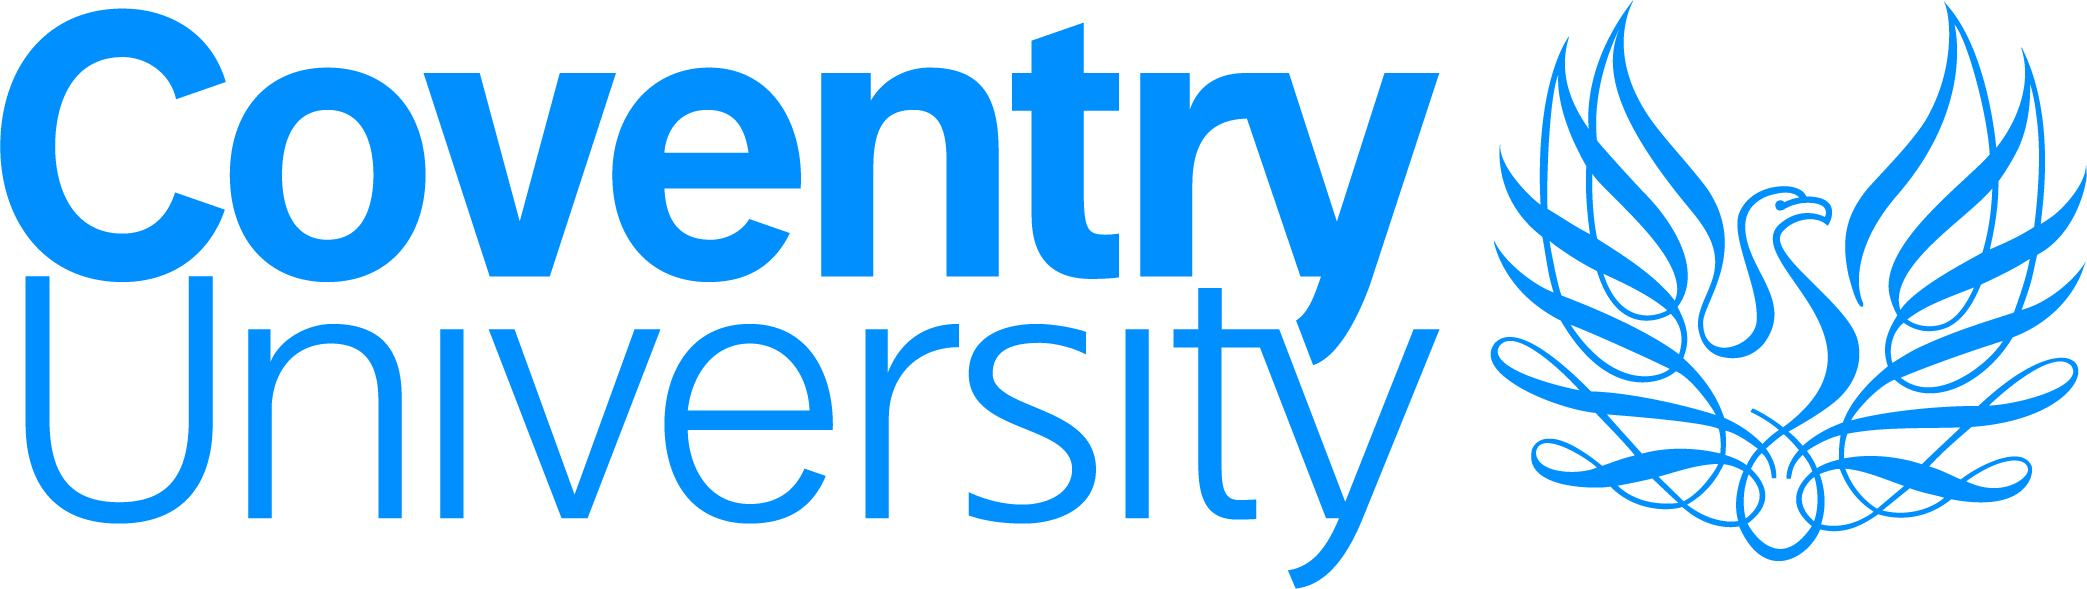 Coventry Universuity logo